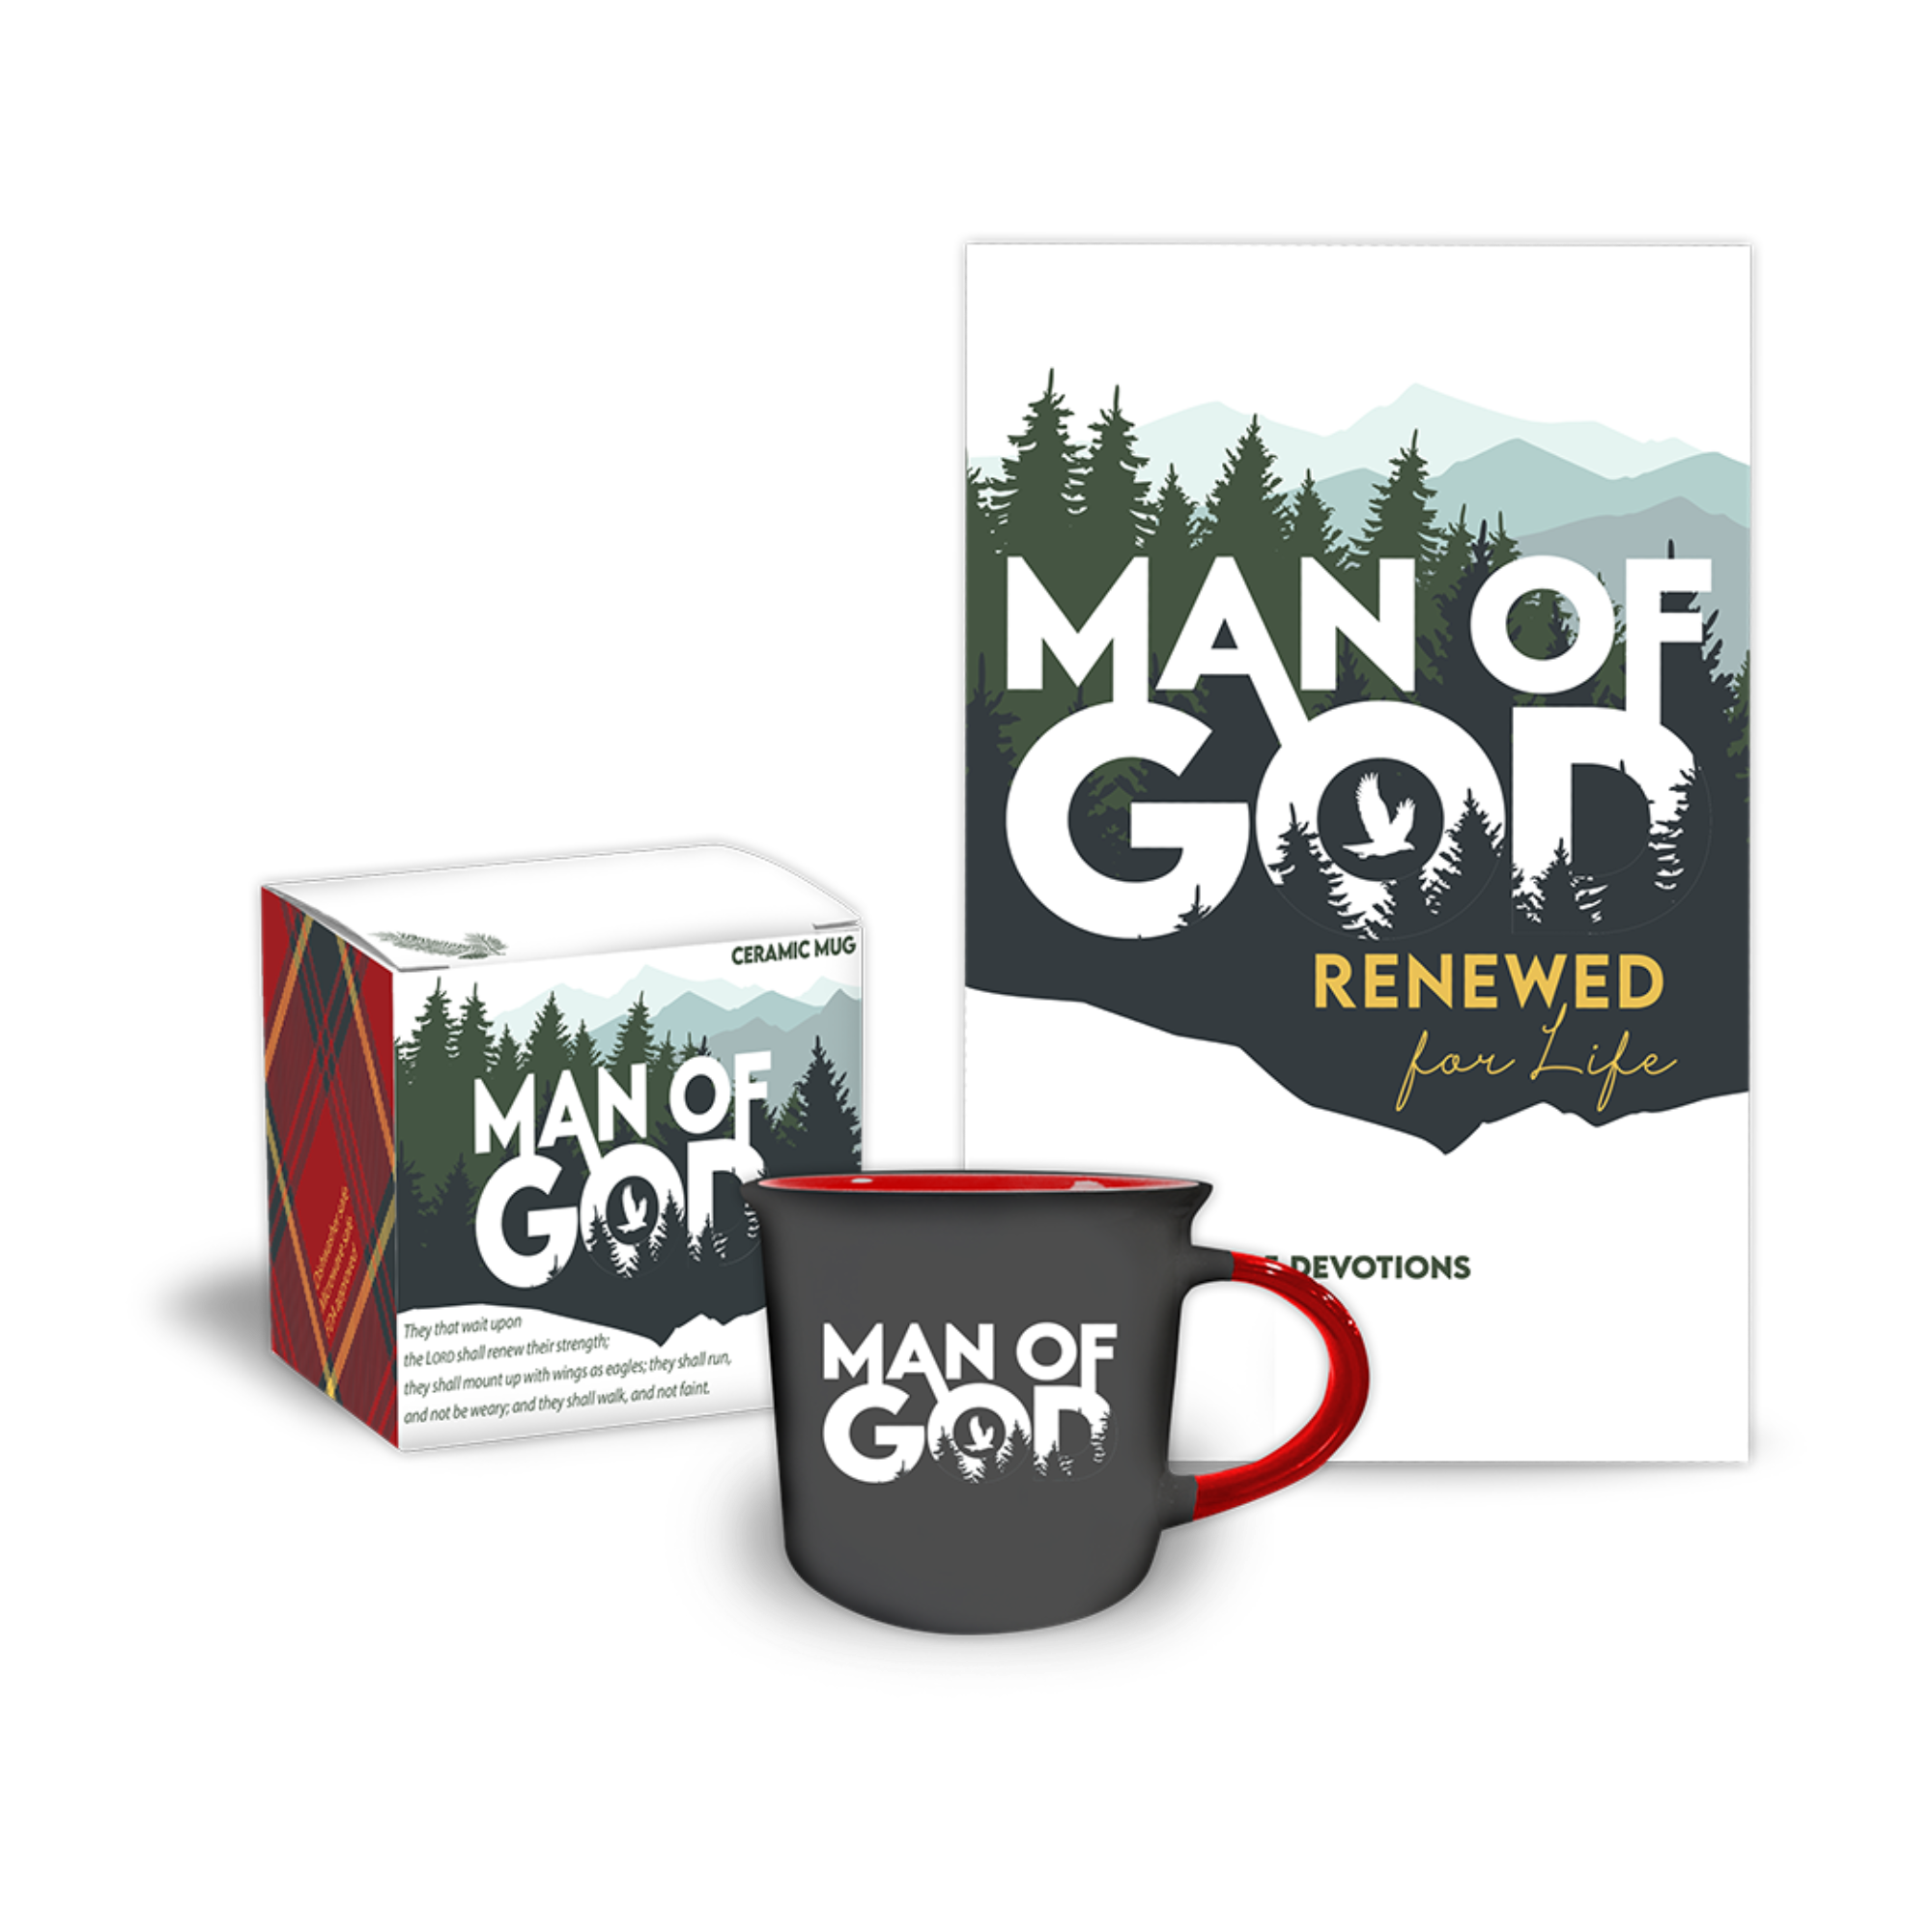 Man of God Renewed for Life Free Devotion Book with Mug Purchase